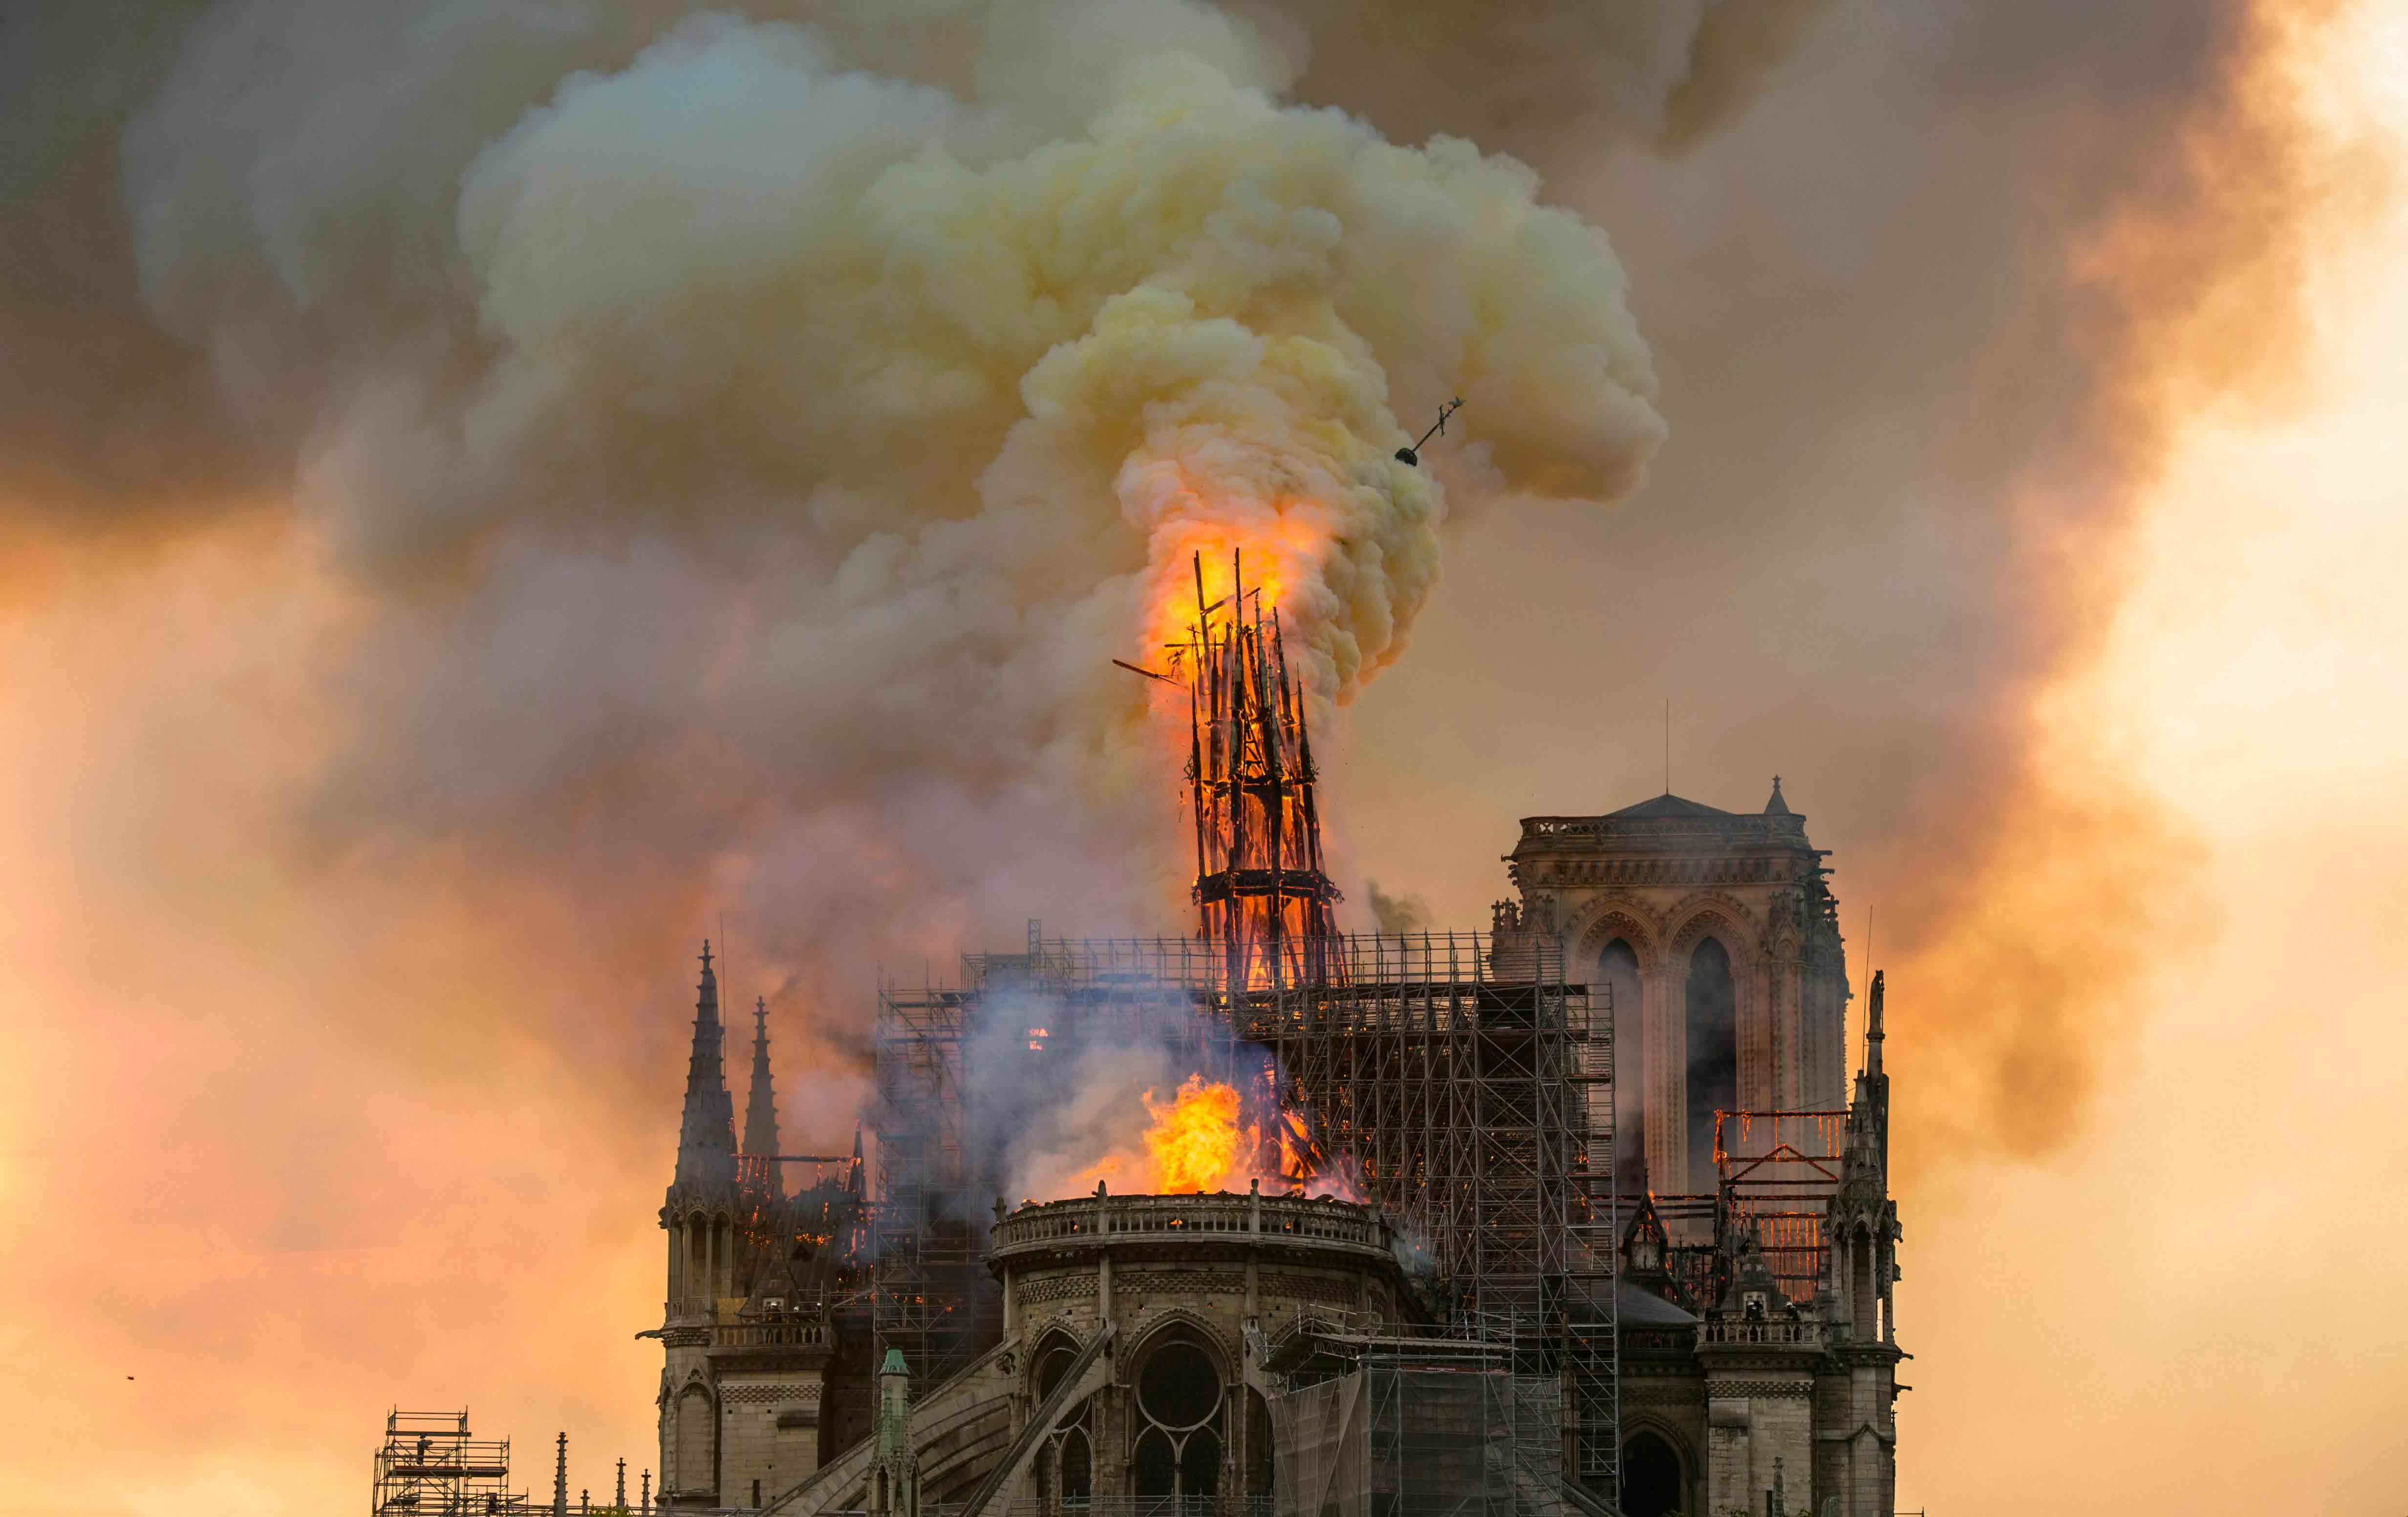 Cathedral of Notre Dame going up in flames